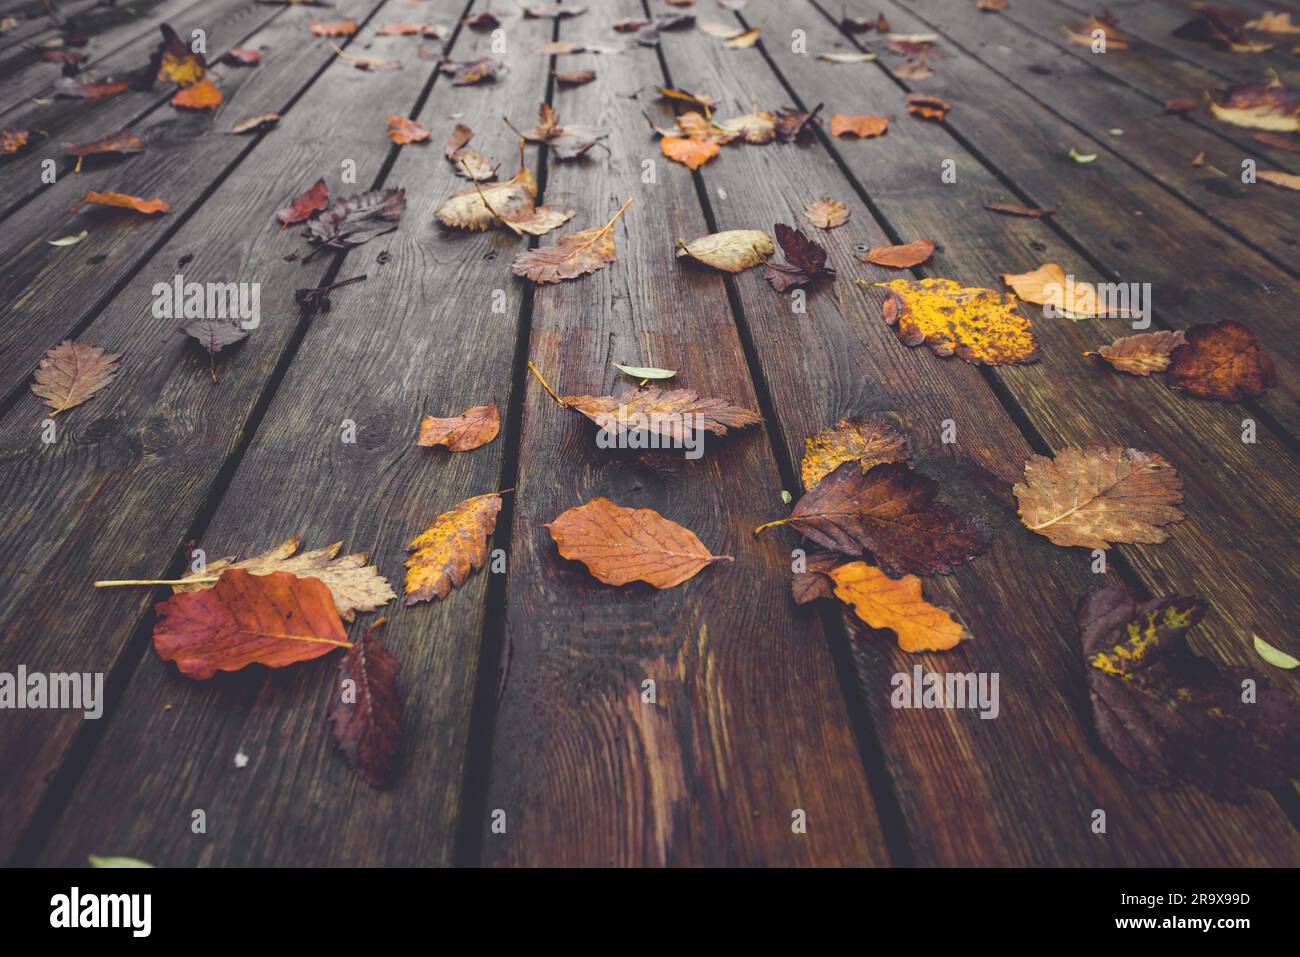 Autumn season with colorful autumn leaves in autumn colors in the fall on wet wooden planks in autumn nature Stock Photo